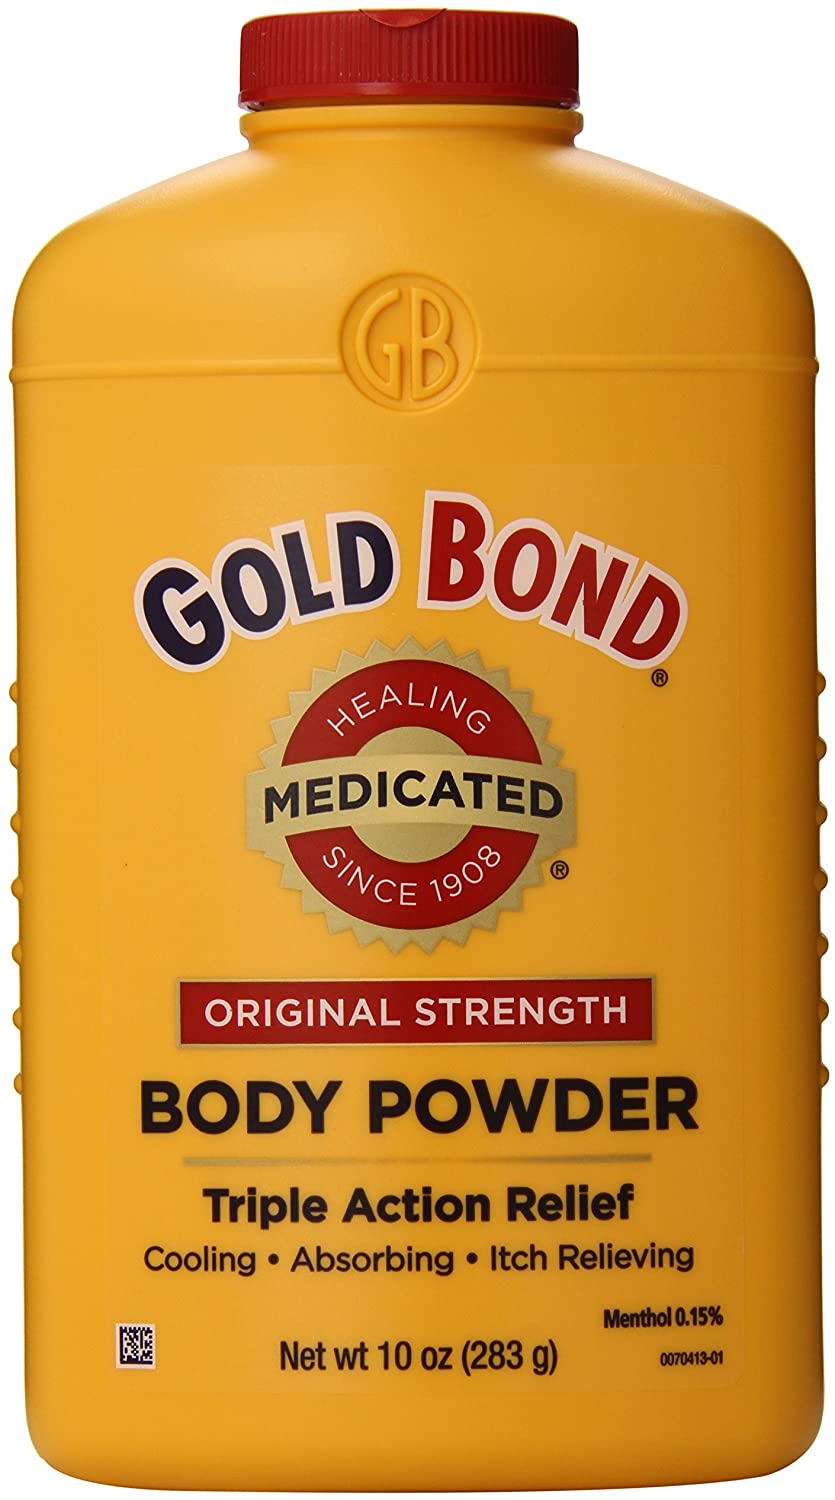 '.Gold Bond MEDICATED ORG BDY PW.'